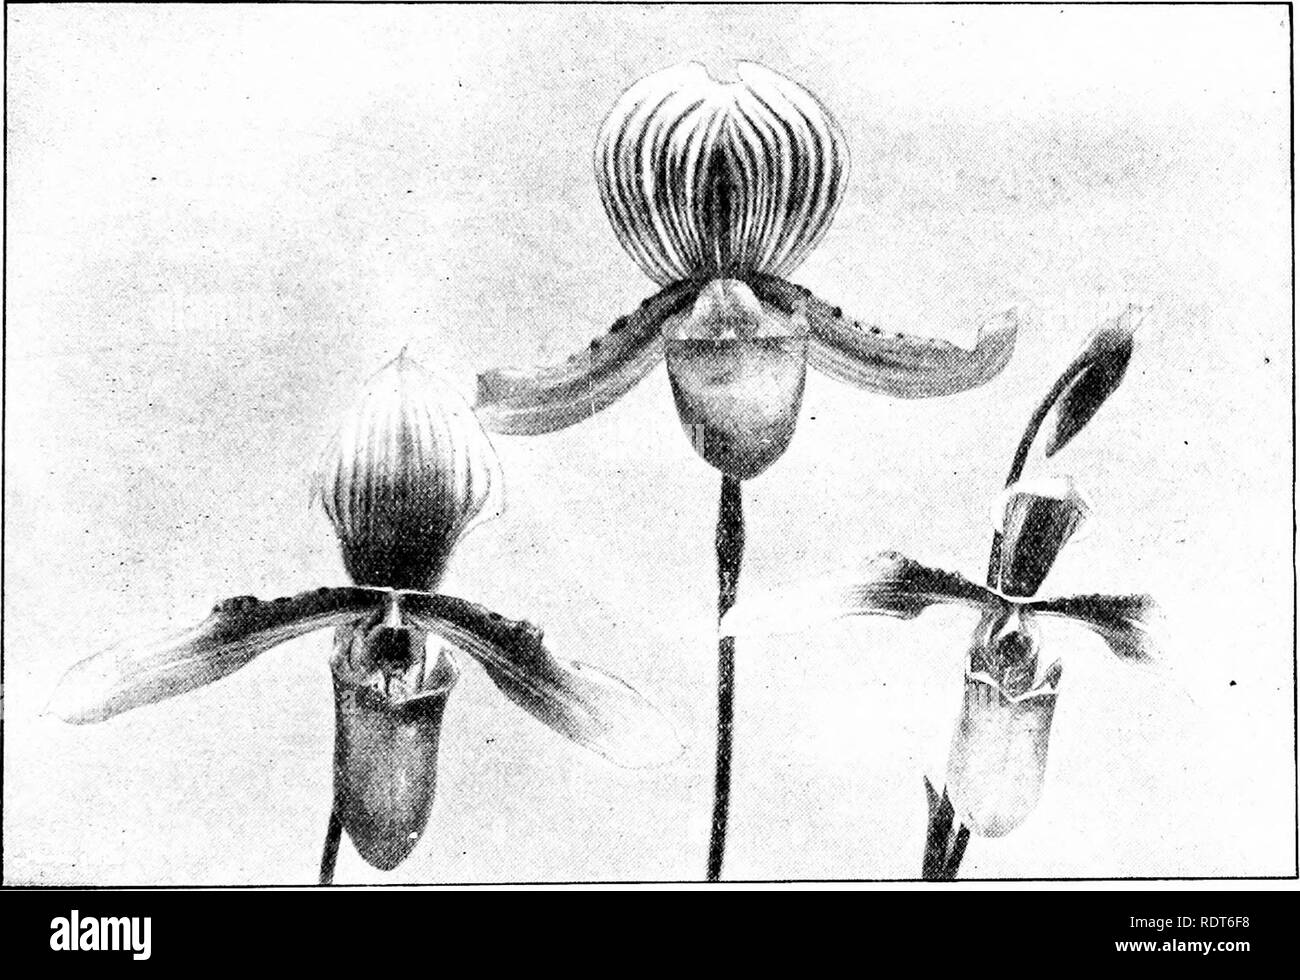 . The orchid stud-book: an enumeration of hybrid orchids of artificial origin, with their parents, raisers, date of first flowering, references to descriptions and figures, and synonymy. With an historical introduction and 120 figures and a chapter on hybridising and raising orchids from seed. Orchids. Part II.] THE ORCHID STUD-BOOK. 205 C. X Schrcederce, J.H. 1902, ii. 526.—Charlesworth. 533. P x Schusterianum (Hookers x villosum).—Linden, 1900. C. X Schusterianum, G.C. 1900, i. 110; O.R. 1900, 90. 535. P. x Scylla (Boxallii x Dayanum), O.R. 1899, 55. -Graves, 1895. C. X Scylla, Amer. G. Marc Stock Photo